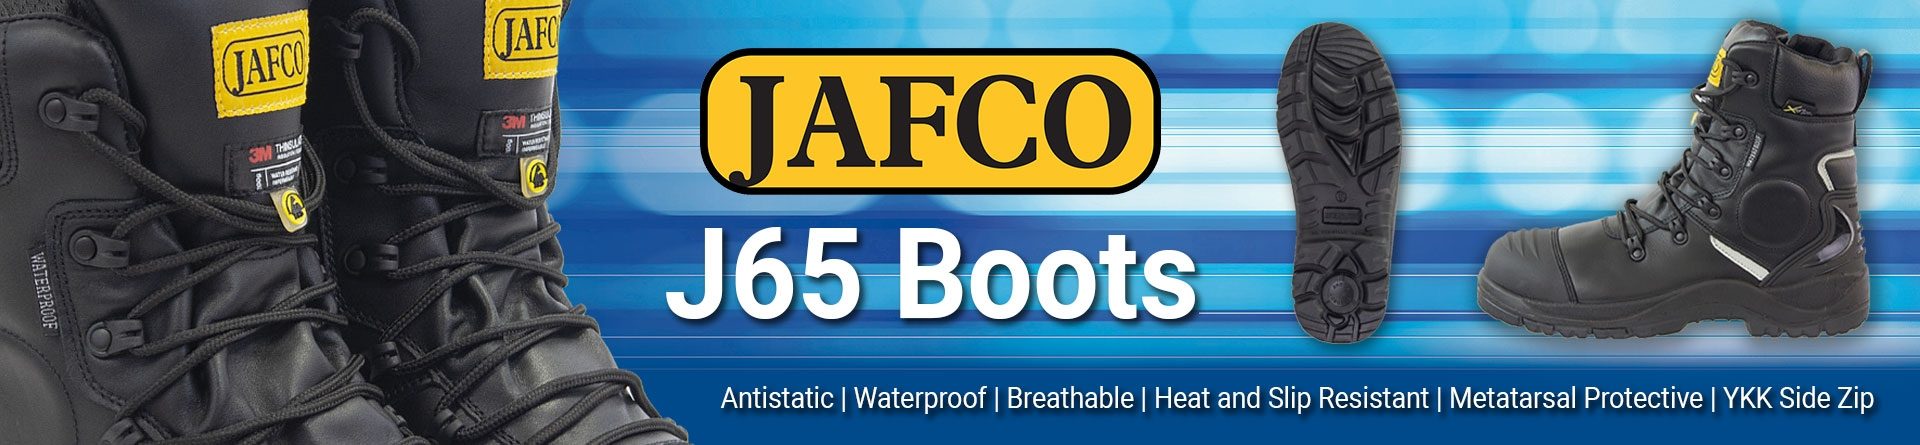 Jafco-J65-Safety-Boots